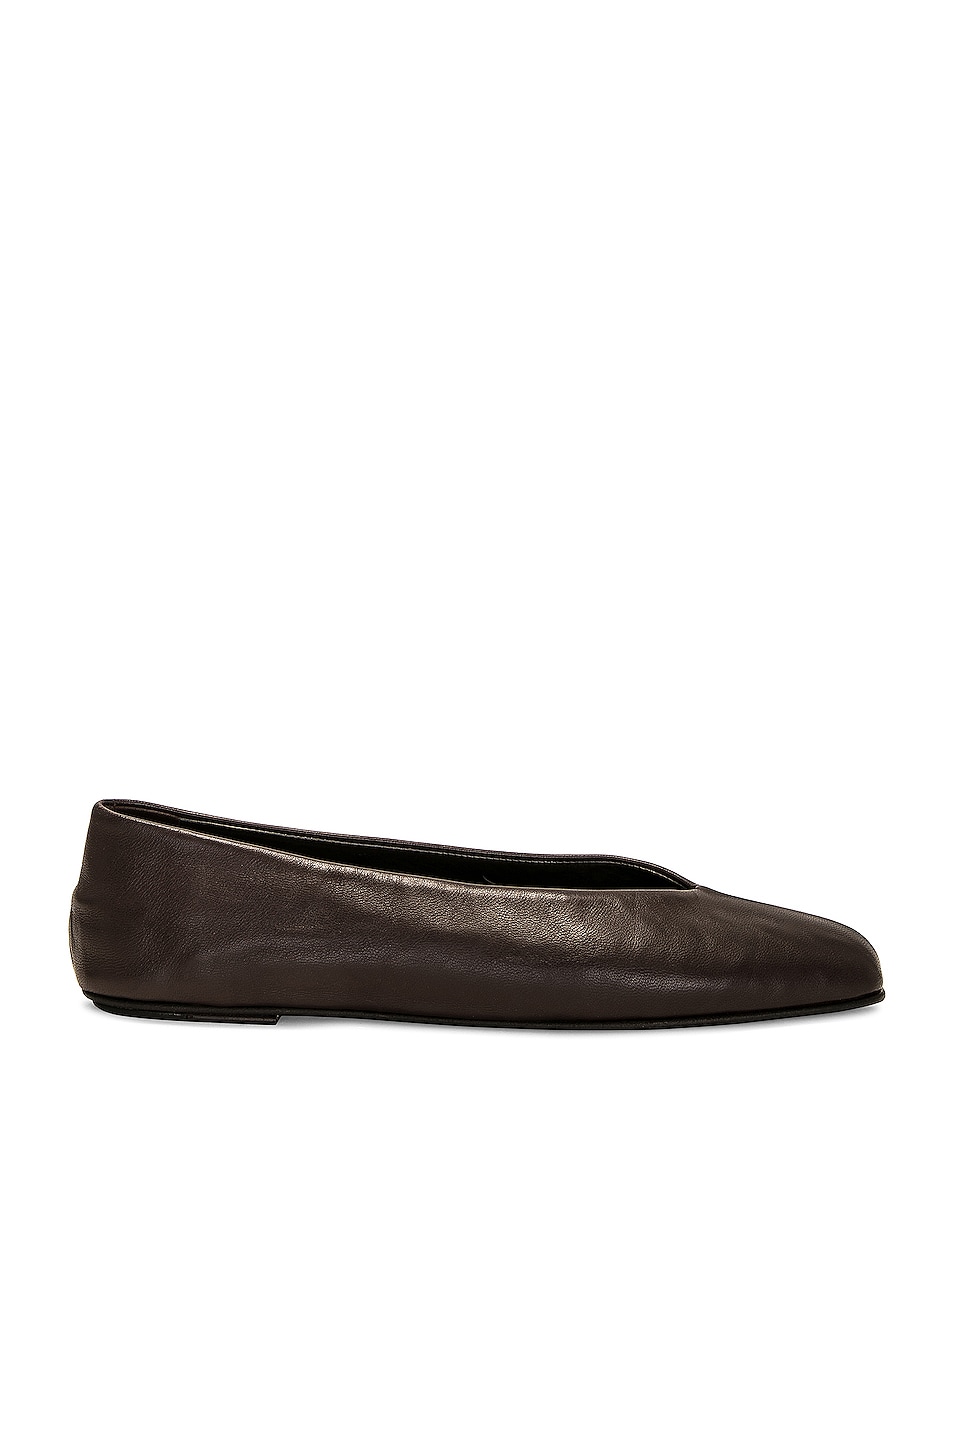 Image 1 of The Row Eva Two Flat in Dark Brown